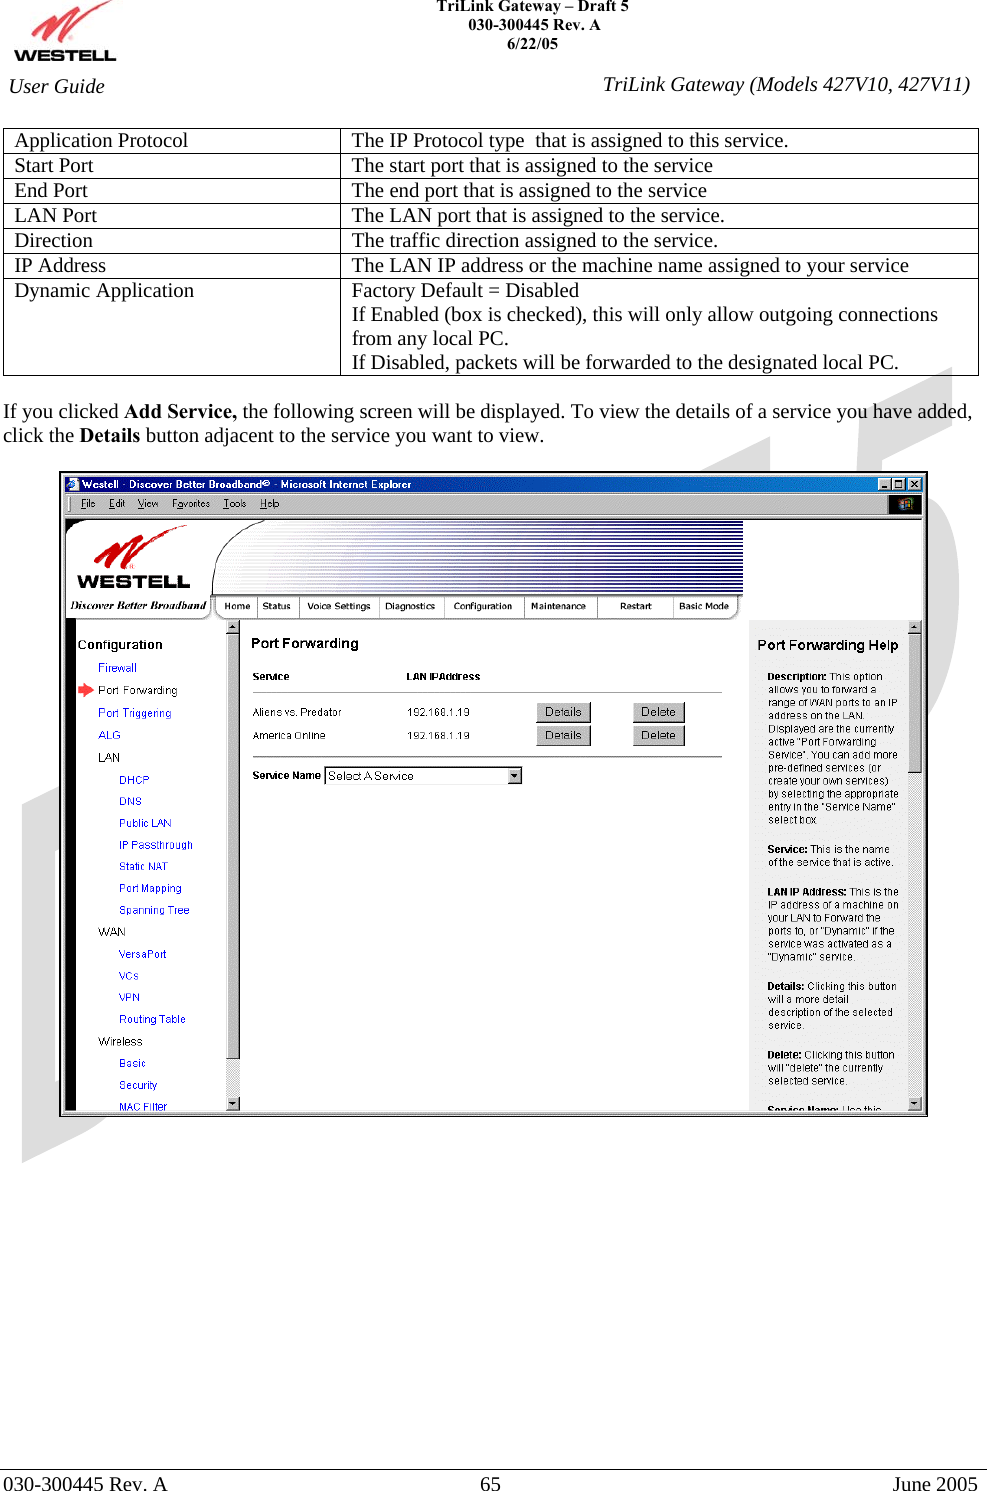    TriLink Gateway – Draft 5   030-300445 Rev. A 6/22/05   030-300445 Rev. A  65  June 2005  User Guide  TriLink Gateway (Models 427V10, 427V11)Application Protocol  The IP Protocol type  that is assigned to this service. Start Port  The start port that is assigned to the service End Port  The end port that is assigned to the service LAN Port  The LAN port that is assigned to the service. Direction  The traffic direction assigned to the service. IP Address  The LAN IP address or the machine name assigned to your service Dynamic Application  Factory Default = Disabled If Enabled (box is checked), this will only allow outgoing connections from any local PC. If Disabled, packets will be forwarded to the designated local PC.  If you clicked Add Service, the following screen will be displayed. To view the details of a service you have added, click the Details button adjacent to the service you want to view.                 